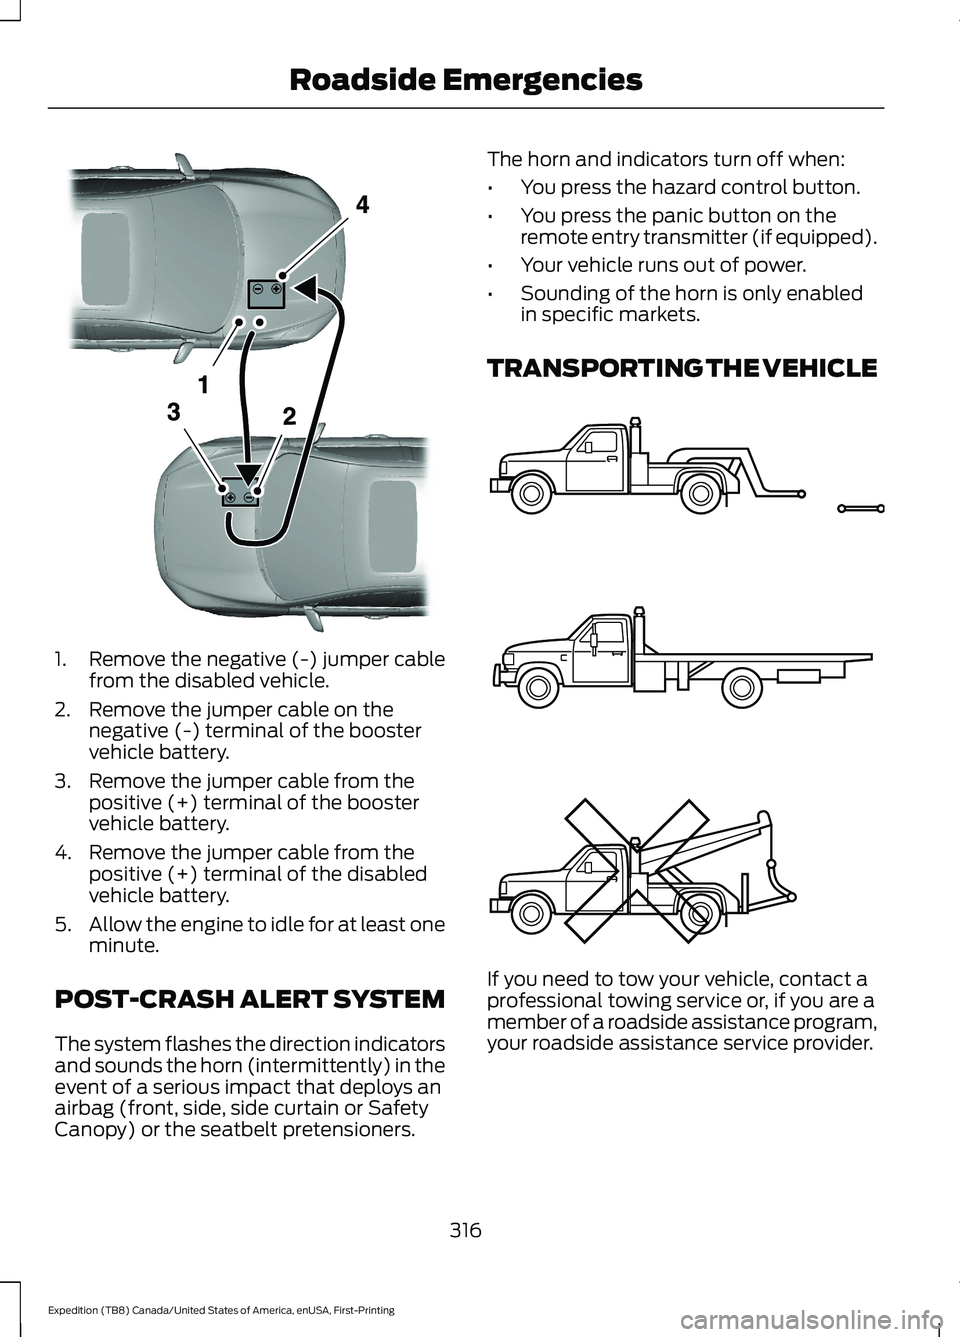 FORD EXPEDITION 2021  Owners Manual 1. Remove the negative (-) jumper cable
from the disabled vehicle.
2. Remove the jumper cable on the negative (-) terminal of the booster
vehicle battery.
3. Remove the jumper cable from the positive 